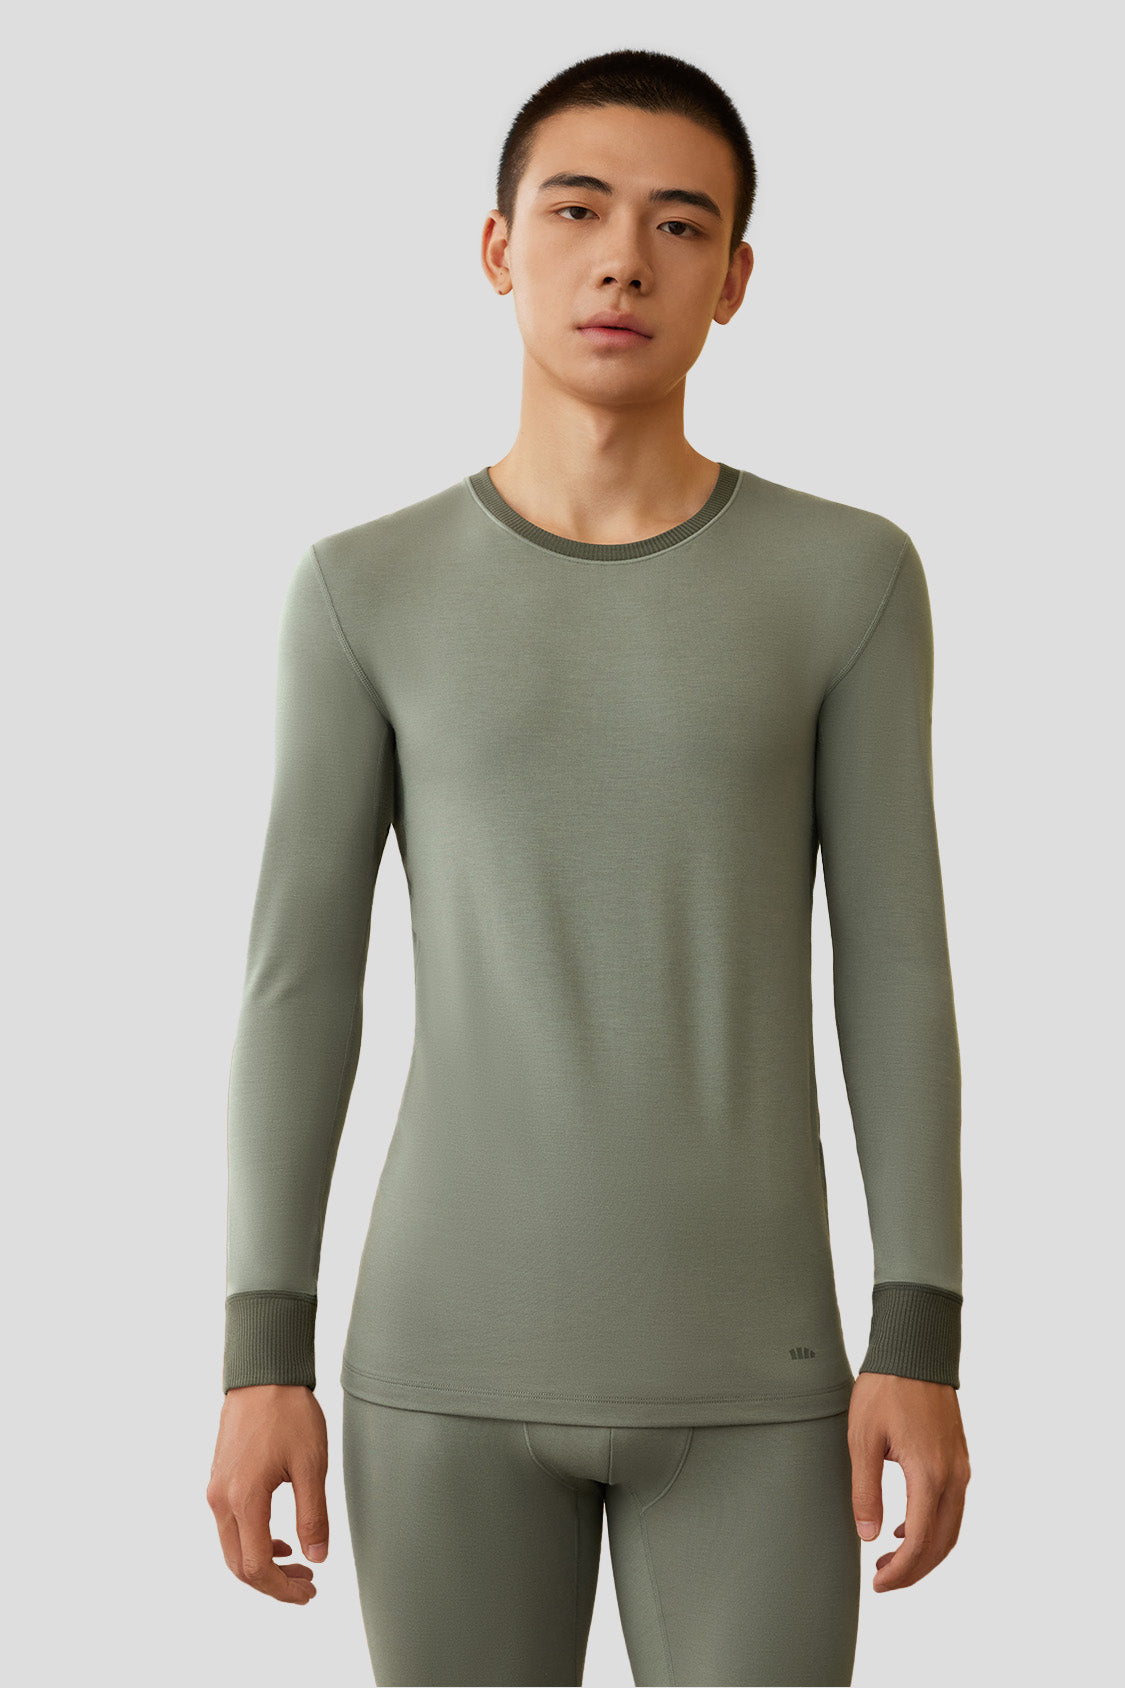 Bodycare Men's Thermal Wear Stay Warm in Style This Winter